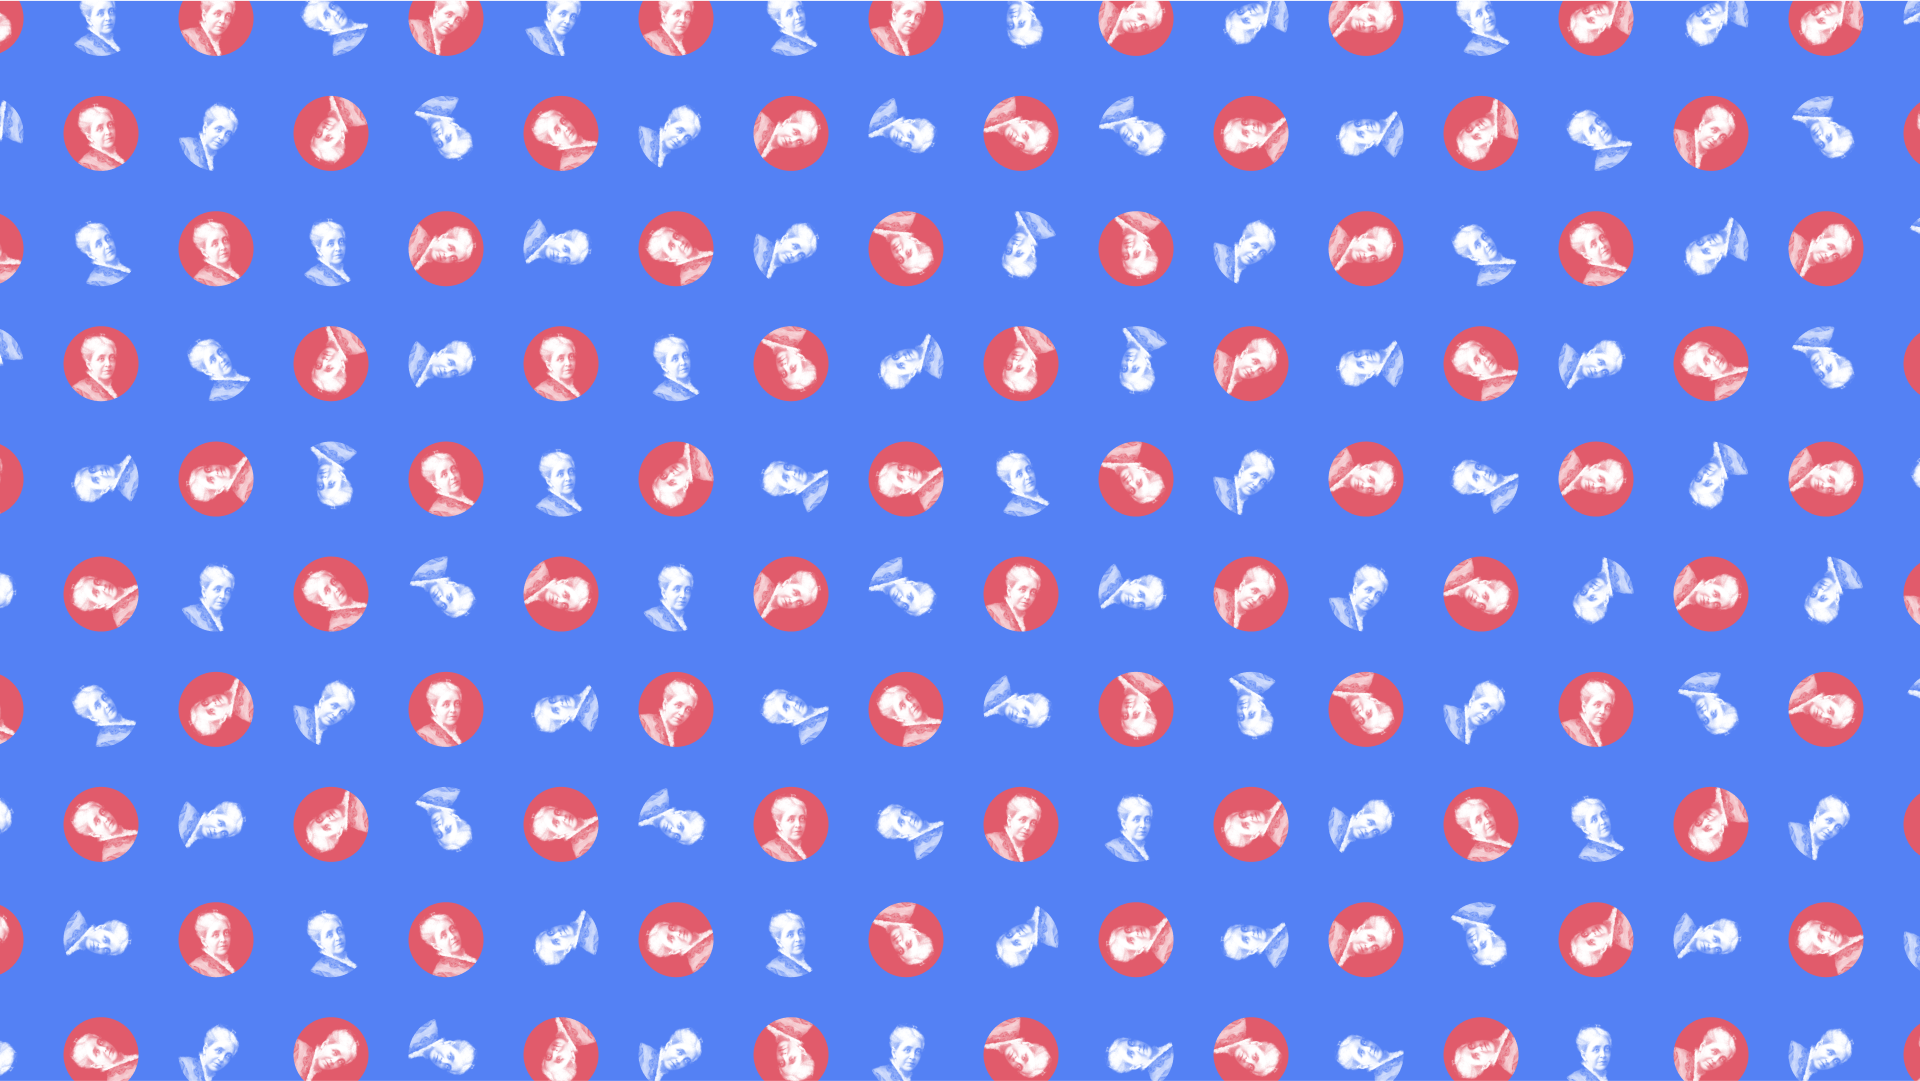 Zoom image - blue + red helens